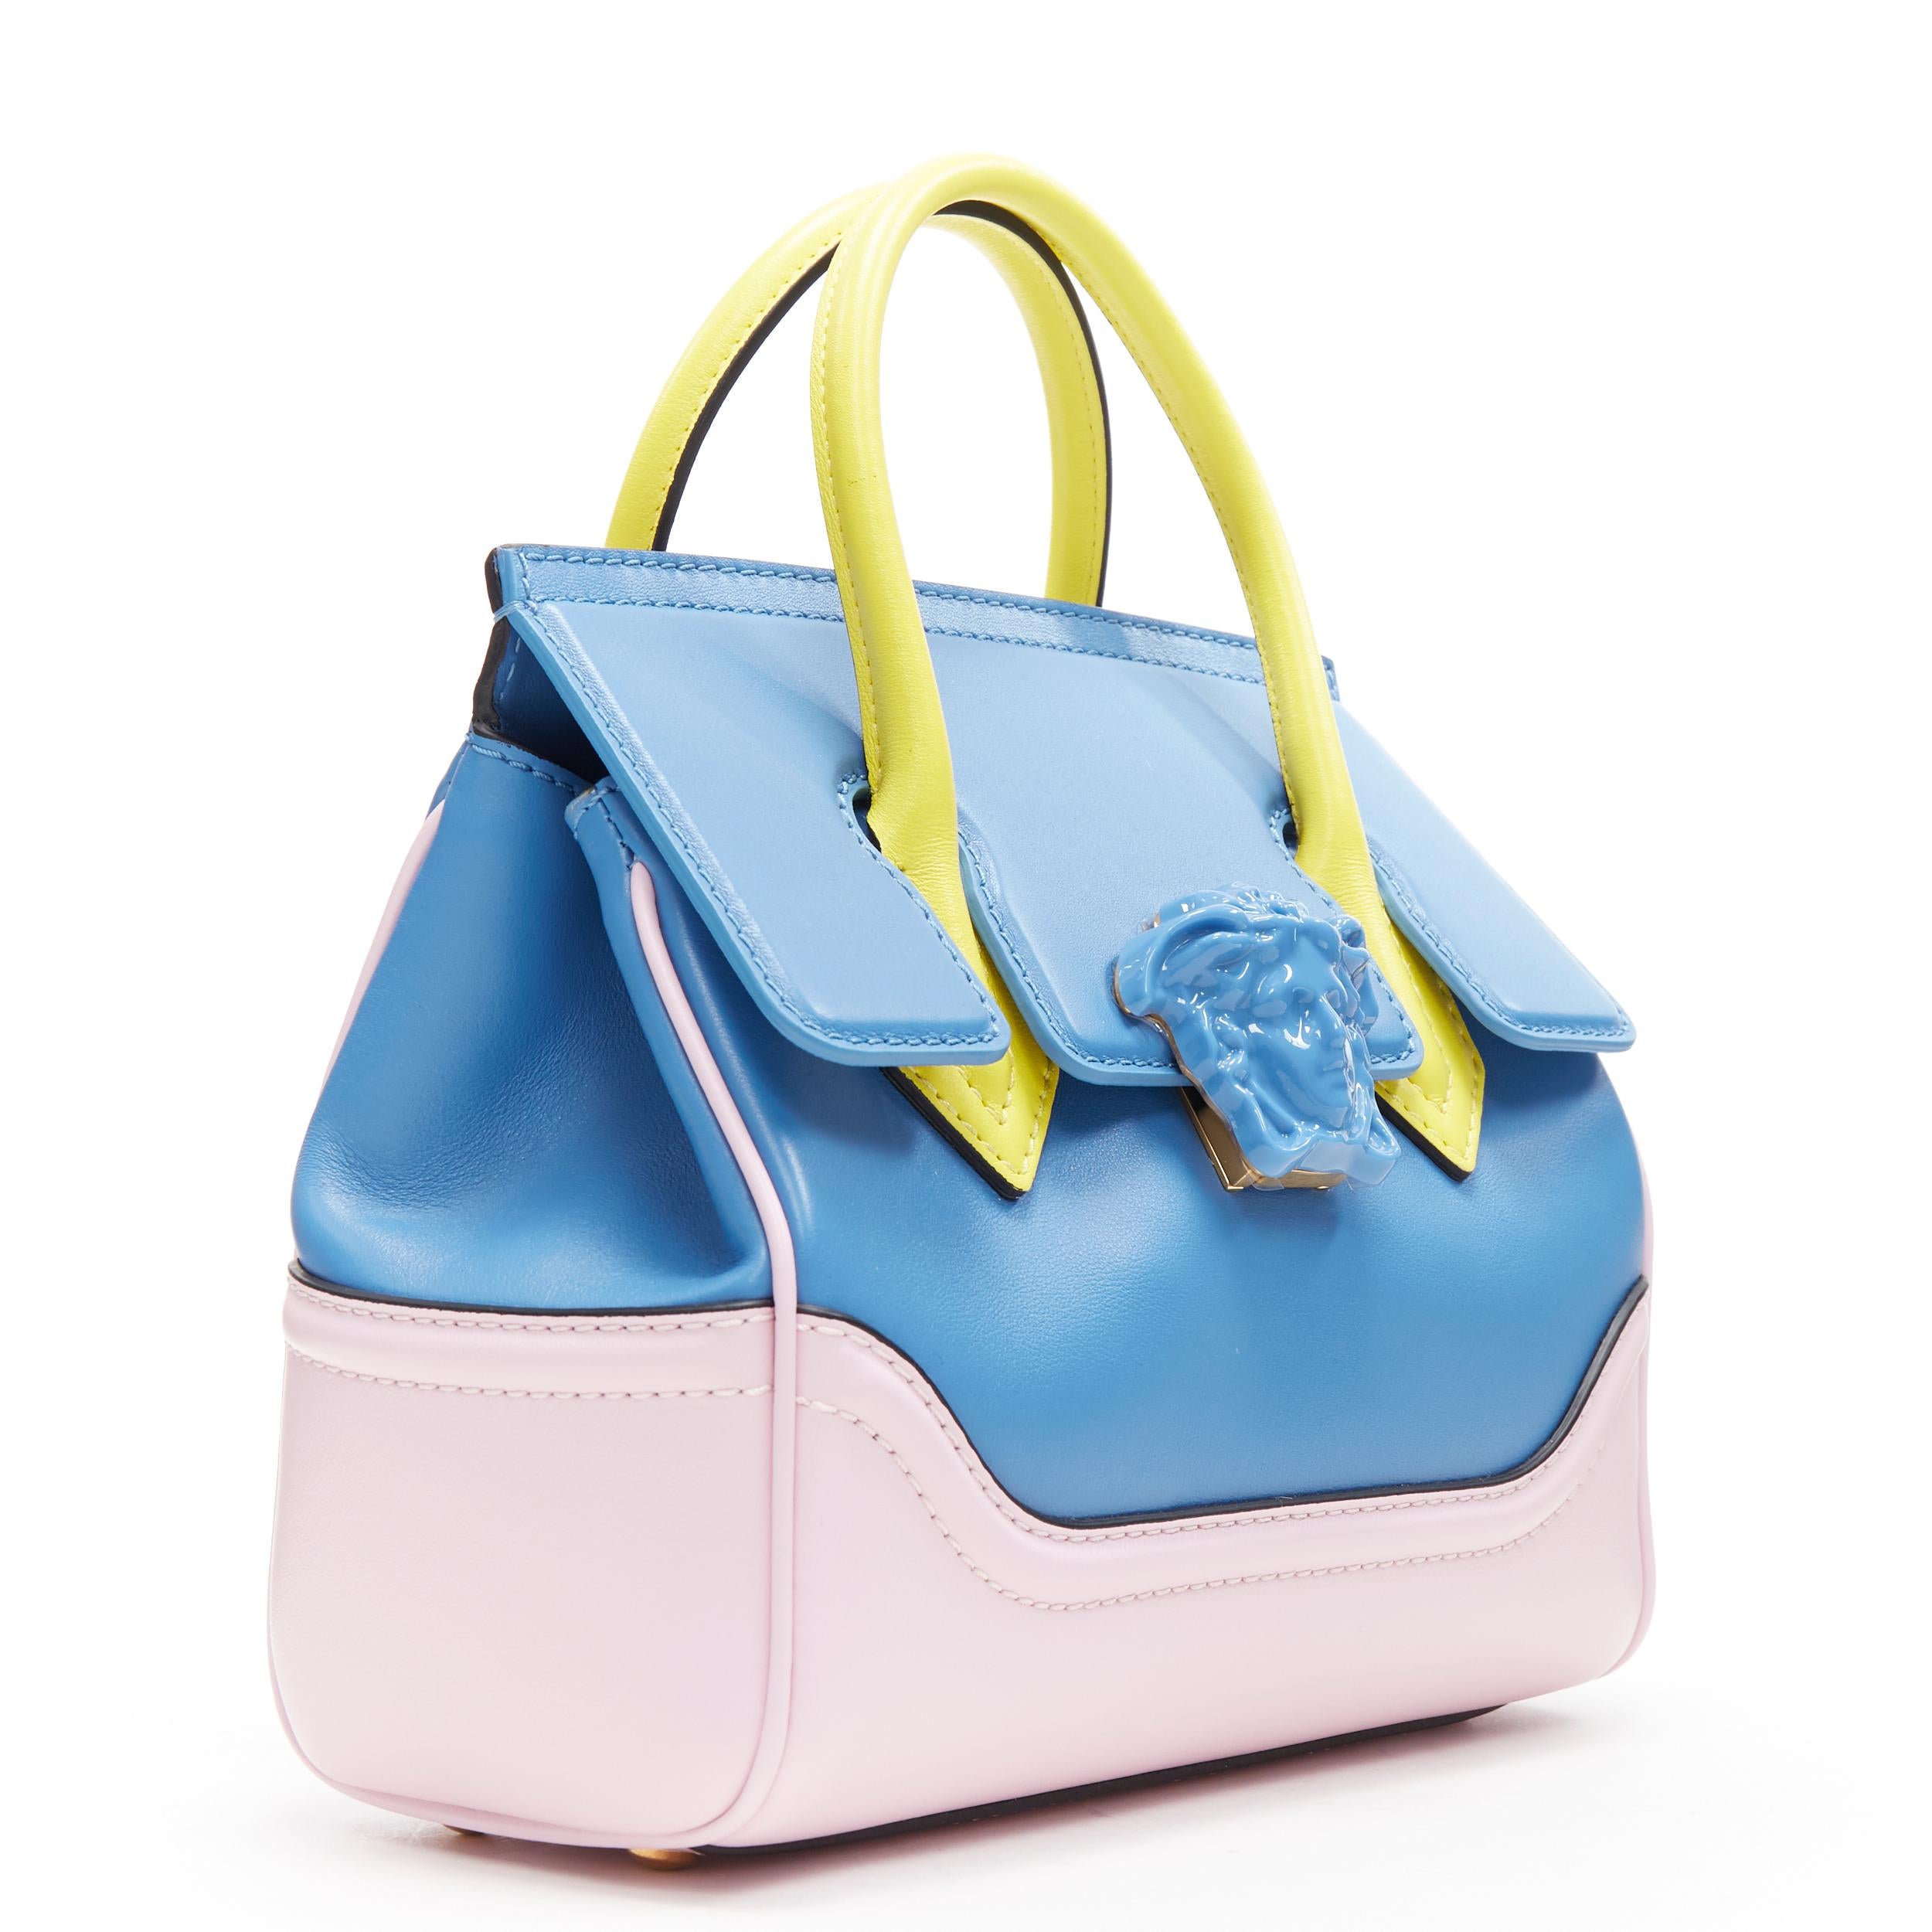 new VERSACE Palazzo Empire Small blue pink yellow pastel colorblocked Medusa bag
Brand: Versace
Designer: Donatella Versace
Collection: Spring Summer 2018
Model Name / Style: Versace Empire
Material: Leather
Color: Blue, pink
Pattern: Solid
Closure: